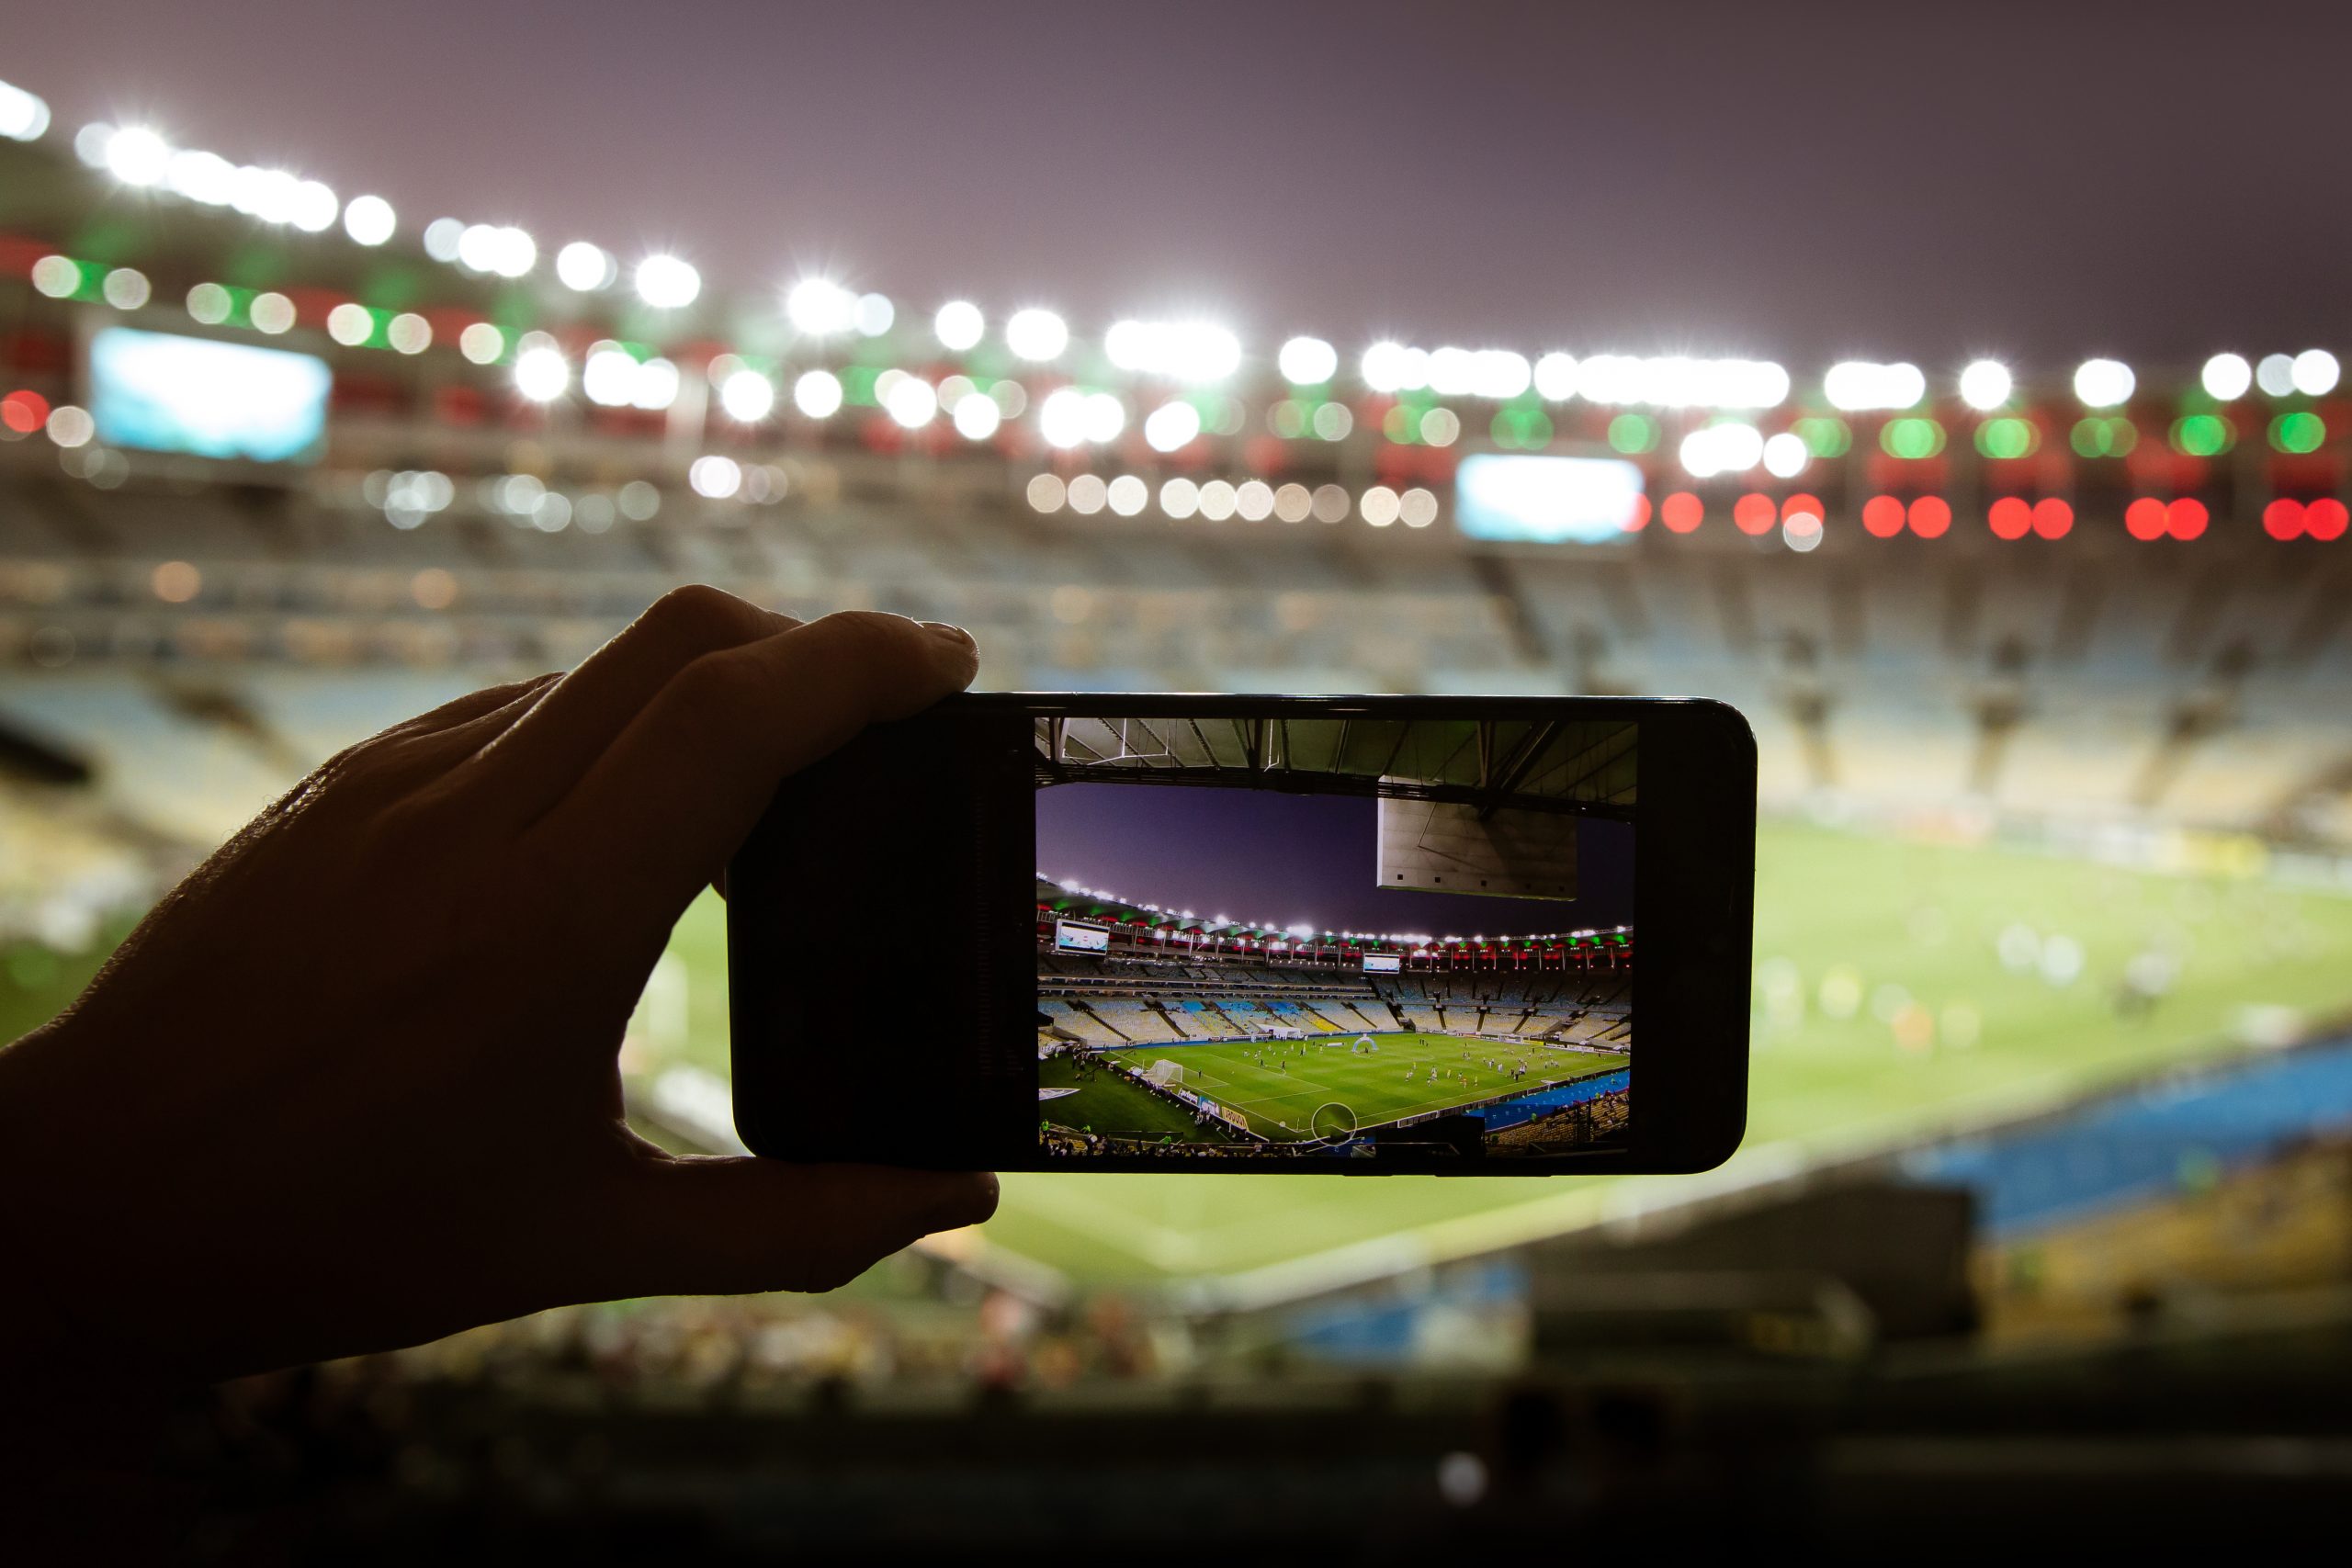 5G at the heart of the stadium experience